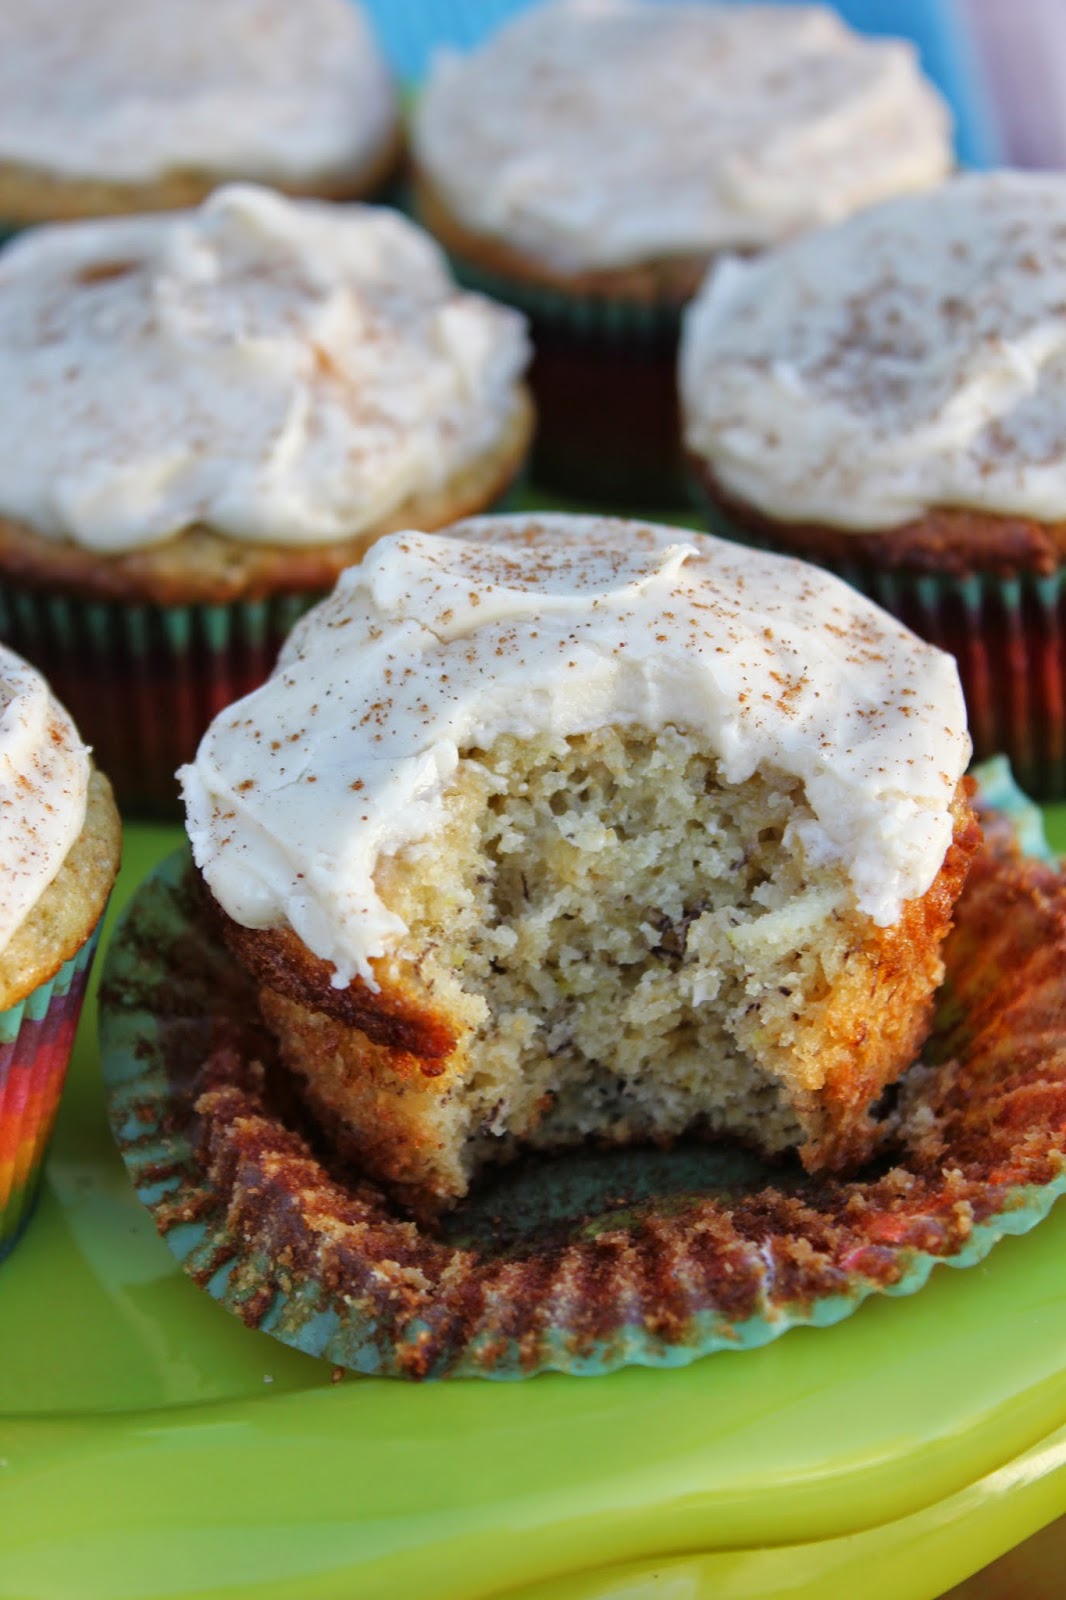 Recipe: Dessert, Recipe: Snack, banana bread cupcakes, Deals to Meals, whipped cinnamon frosting, brown sugar frosting, banana bread cake, cupcakes